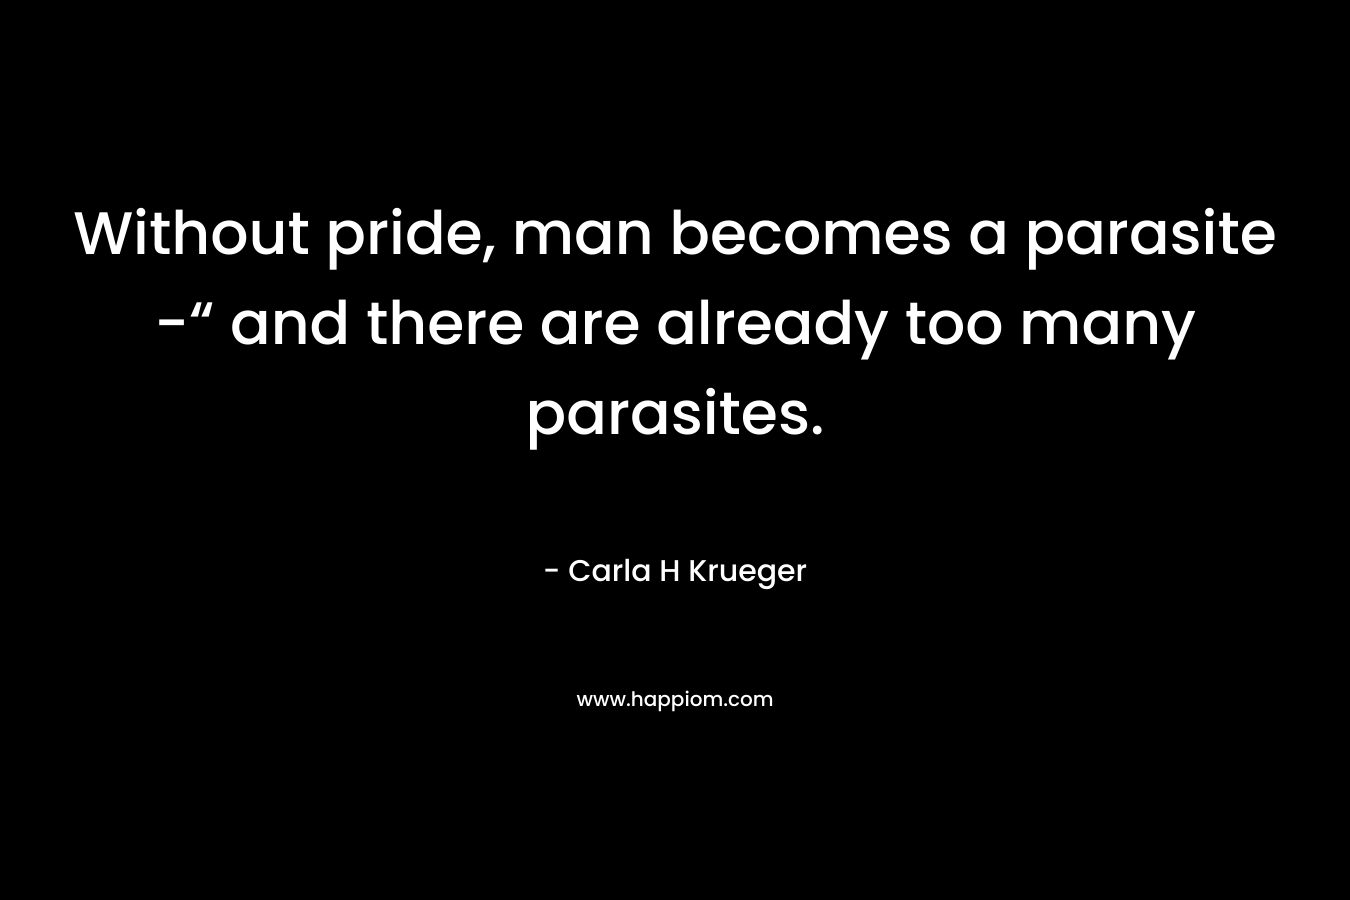 Without pride, man becomes a parasite -“ and there are already too many parasites.